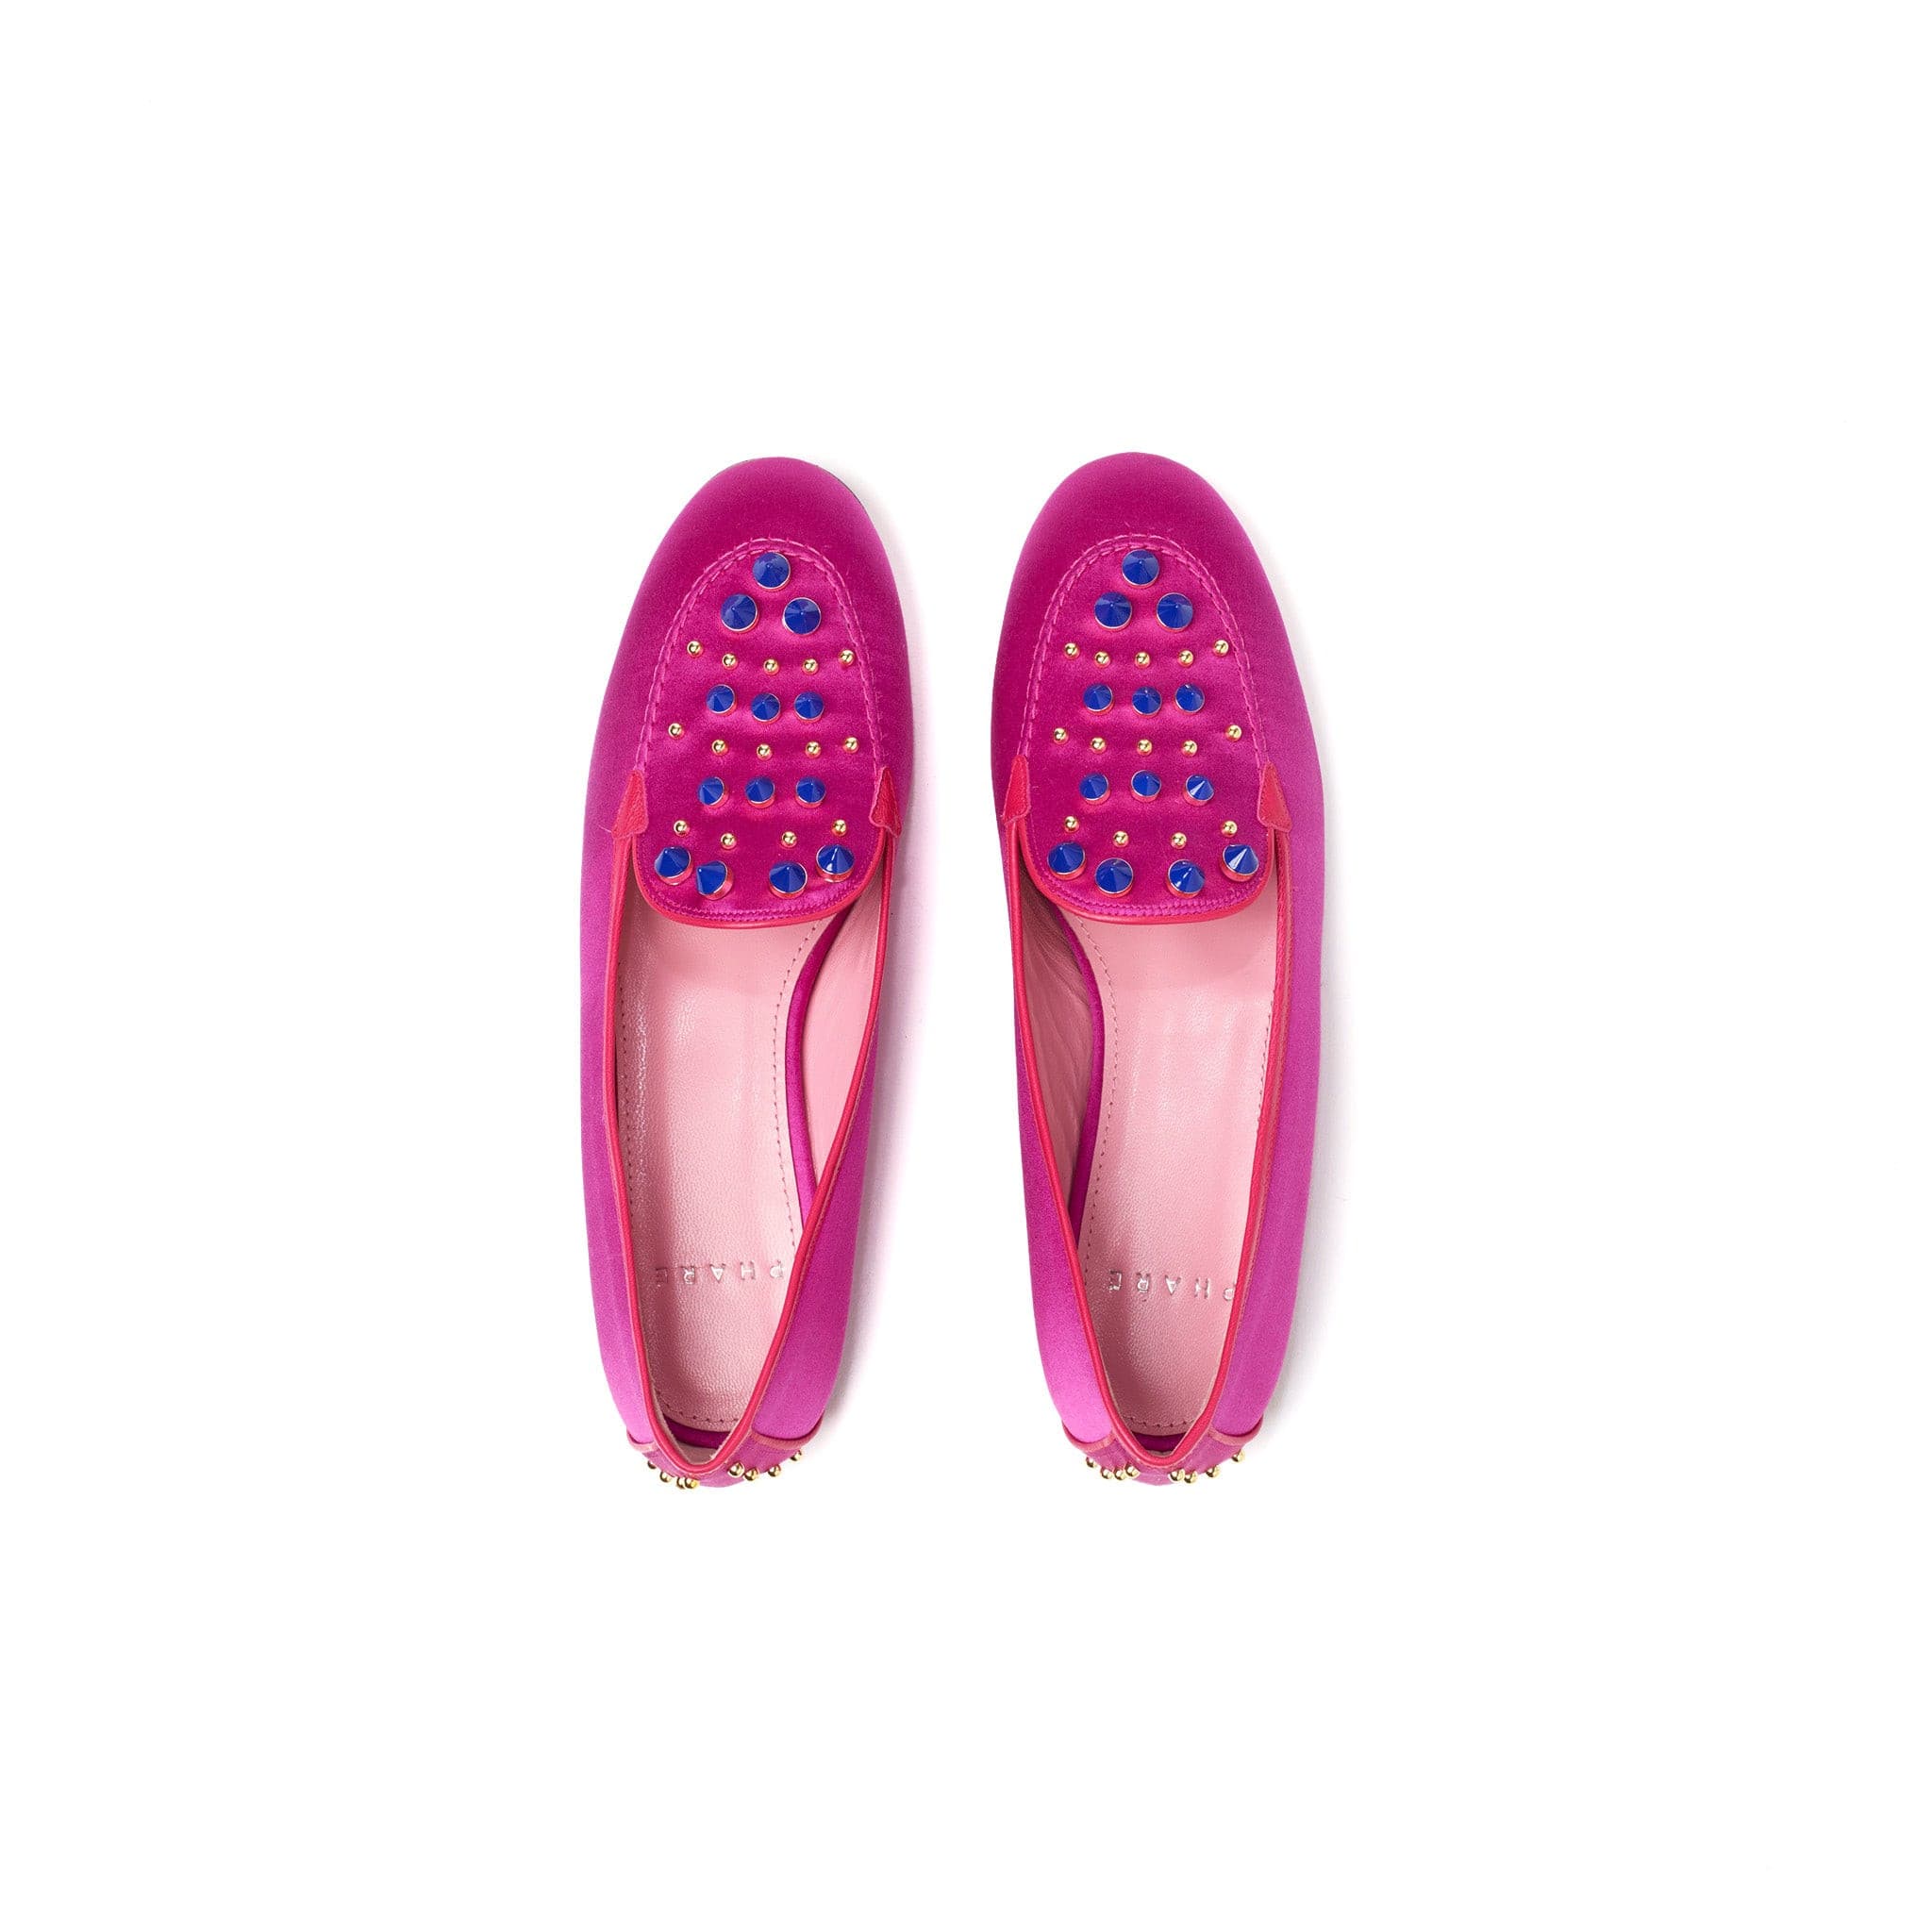 Phare Studded loafer in magenta silk satin with blue and gold studs back view 